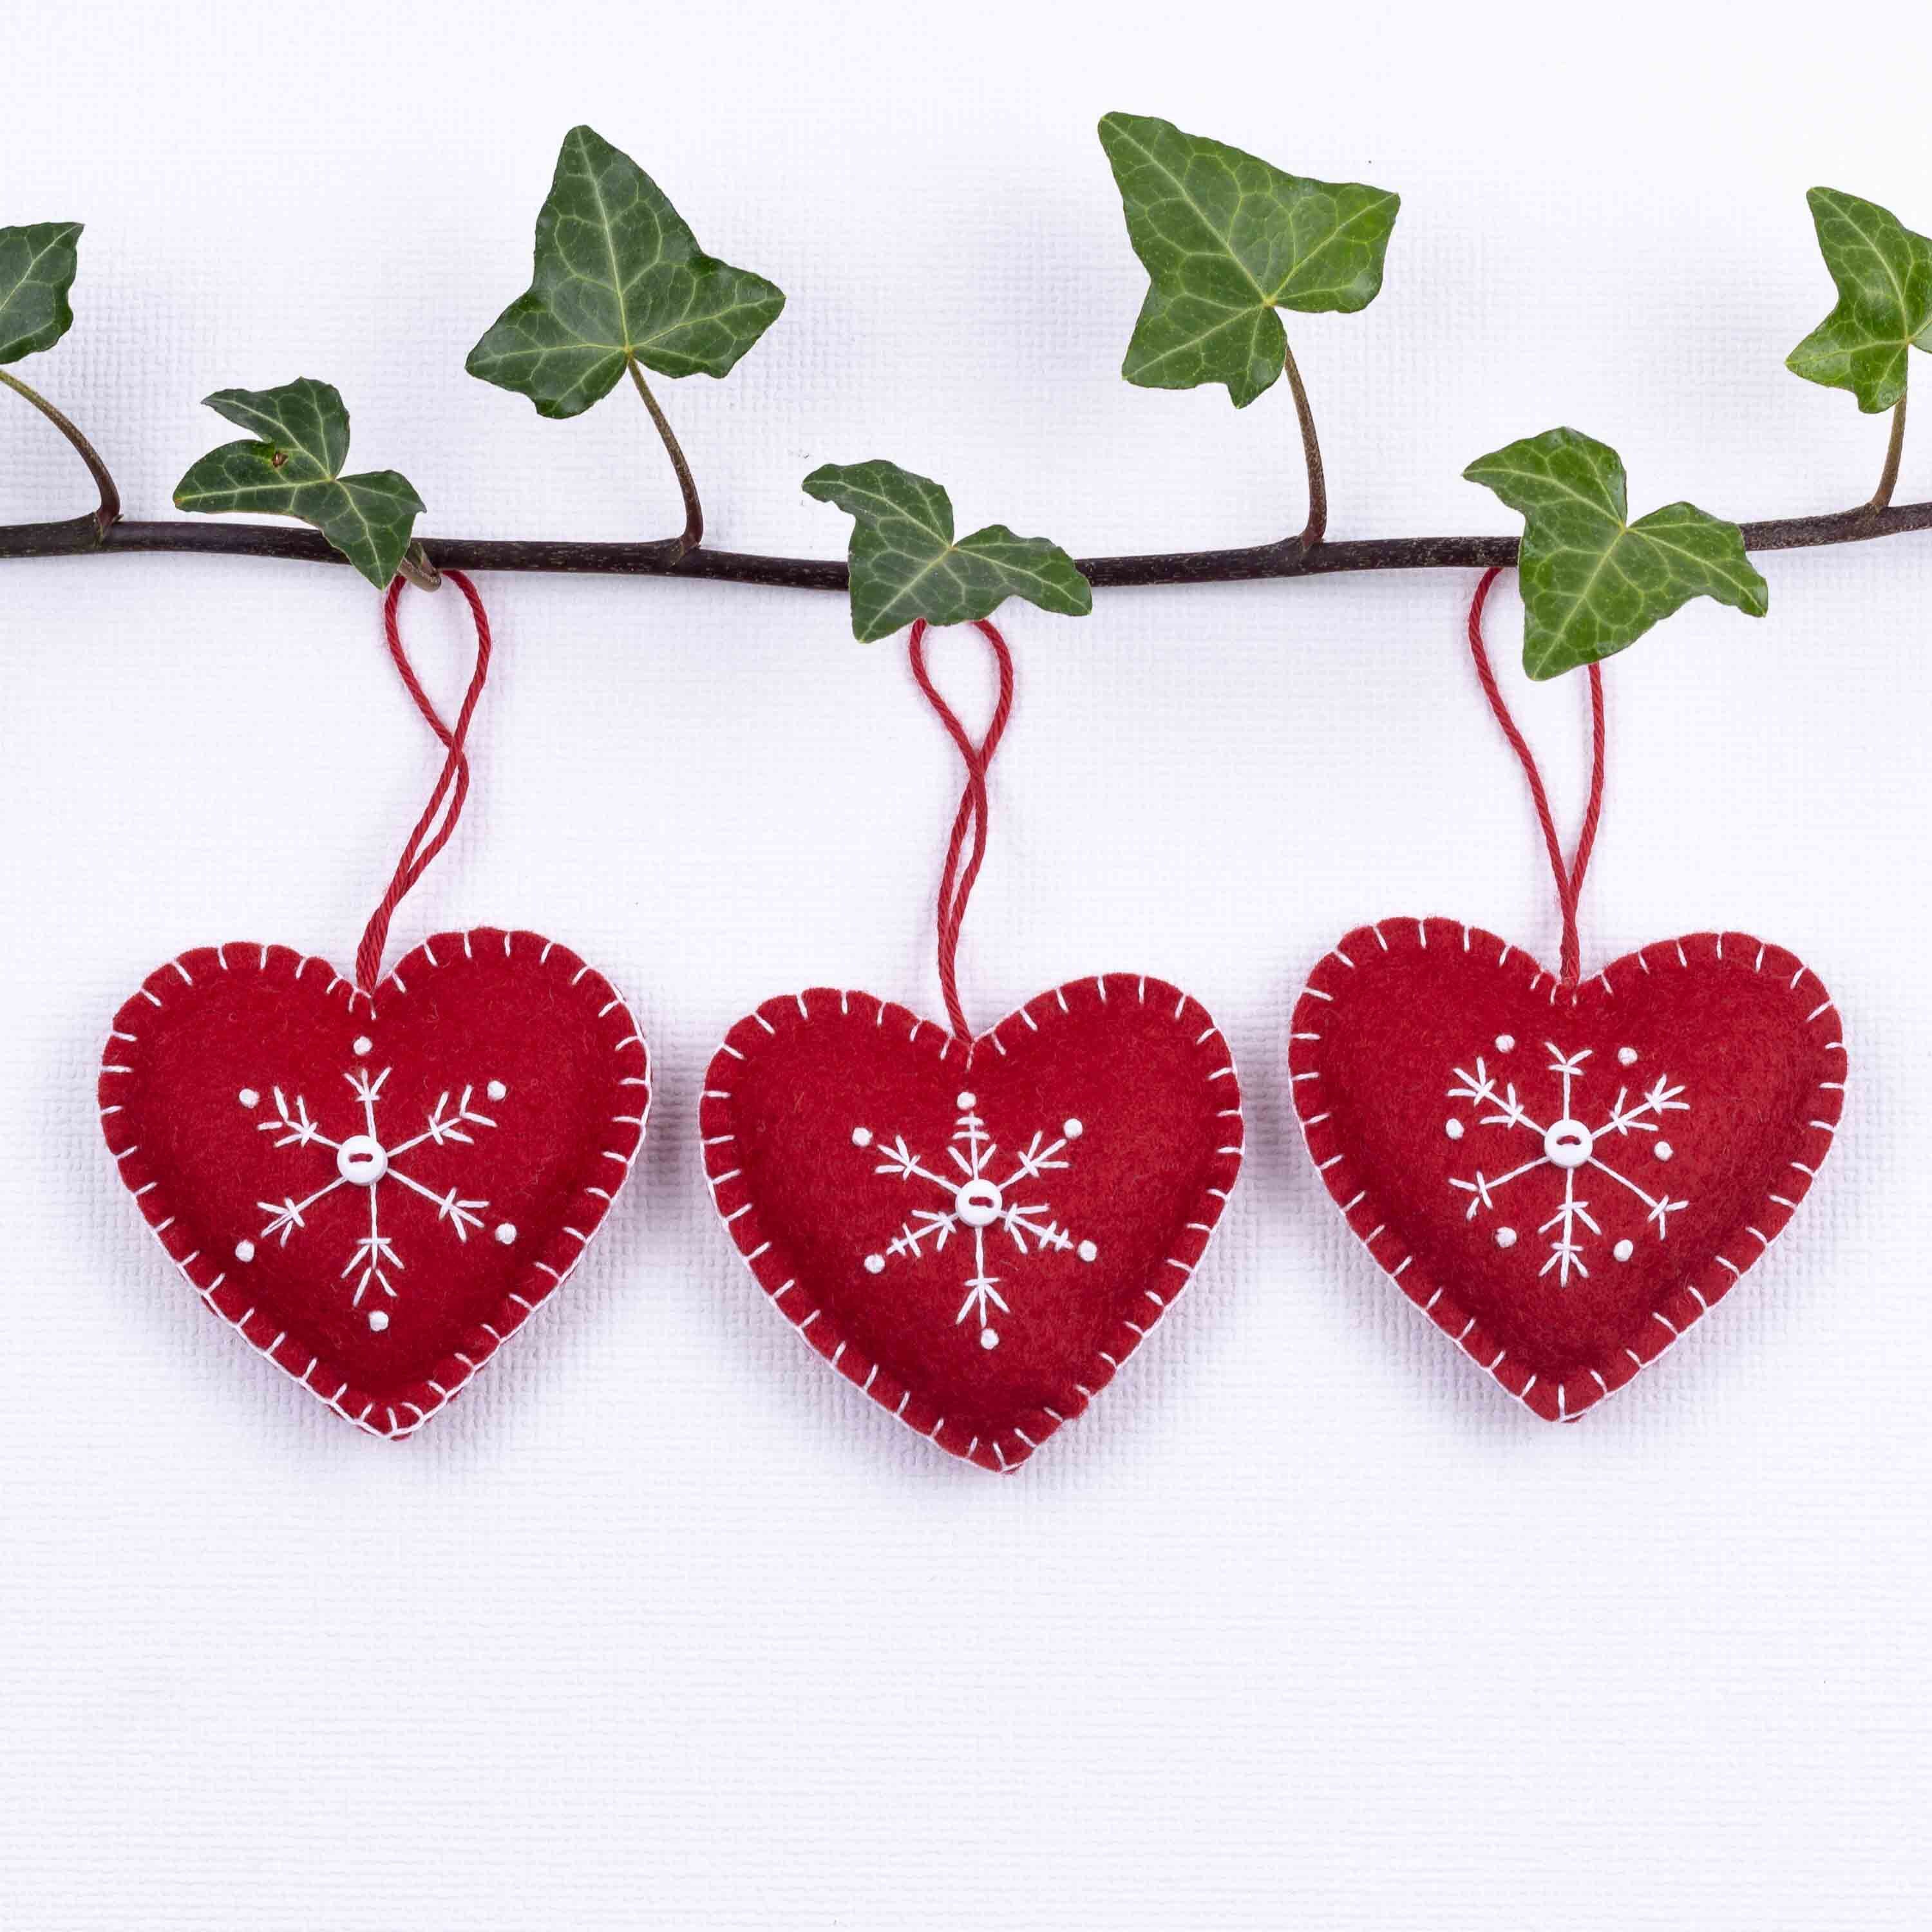 Keimprove 10 Pcs Wooden Heart Hanging Ornament Set with Rope - Red Love Heart Tags with Snowflake Pattern Wood Tree Pendant Decorations for Christmas